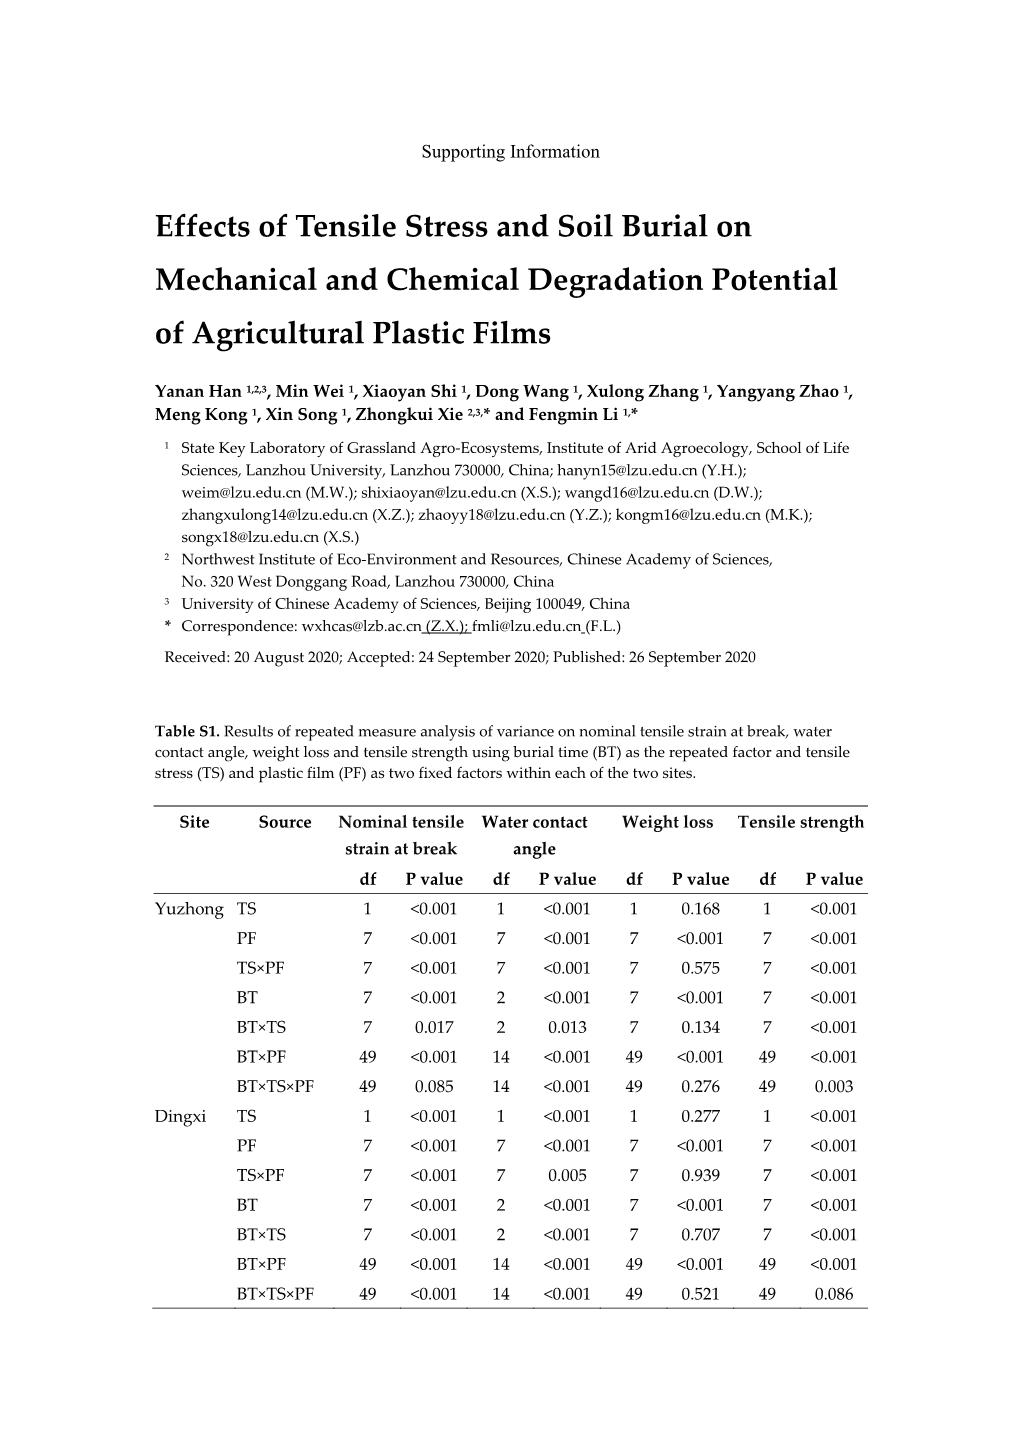 Effects of Tensile Stress and Soil Burial on Mechanical and Chemical Degradation Potential of Agricultural Plastic Films